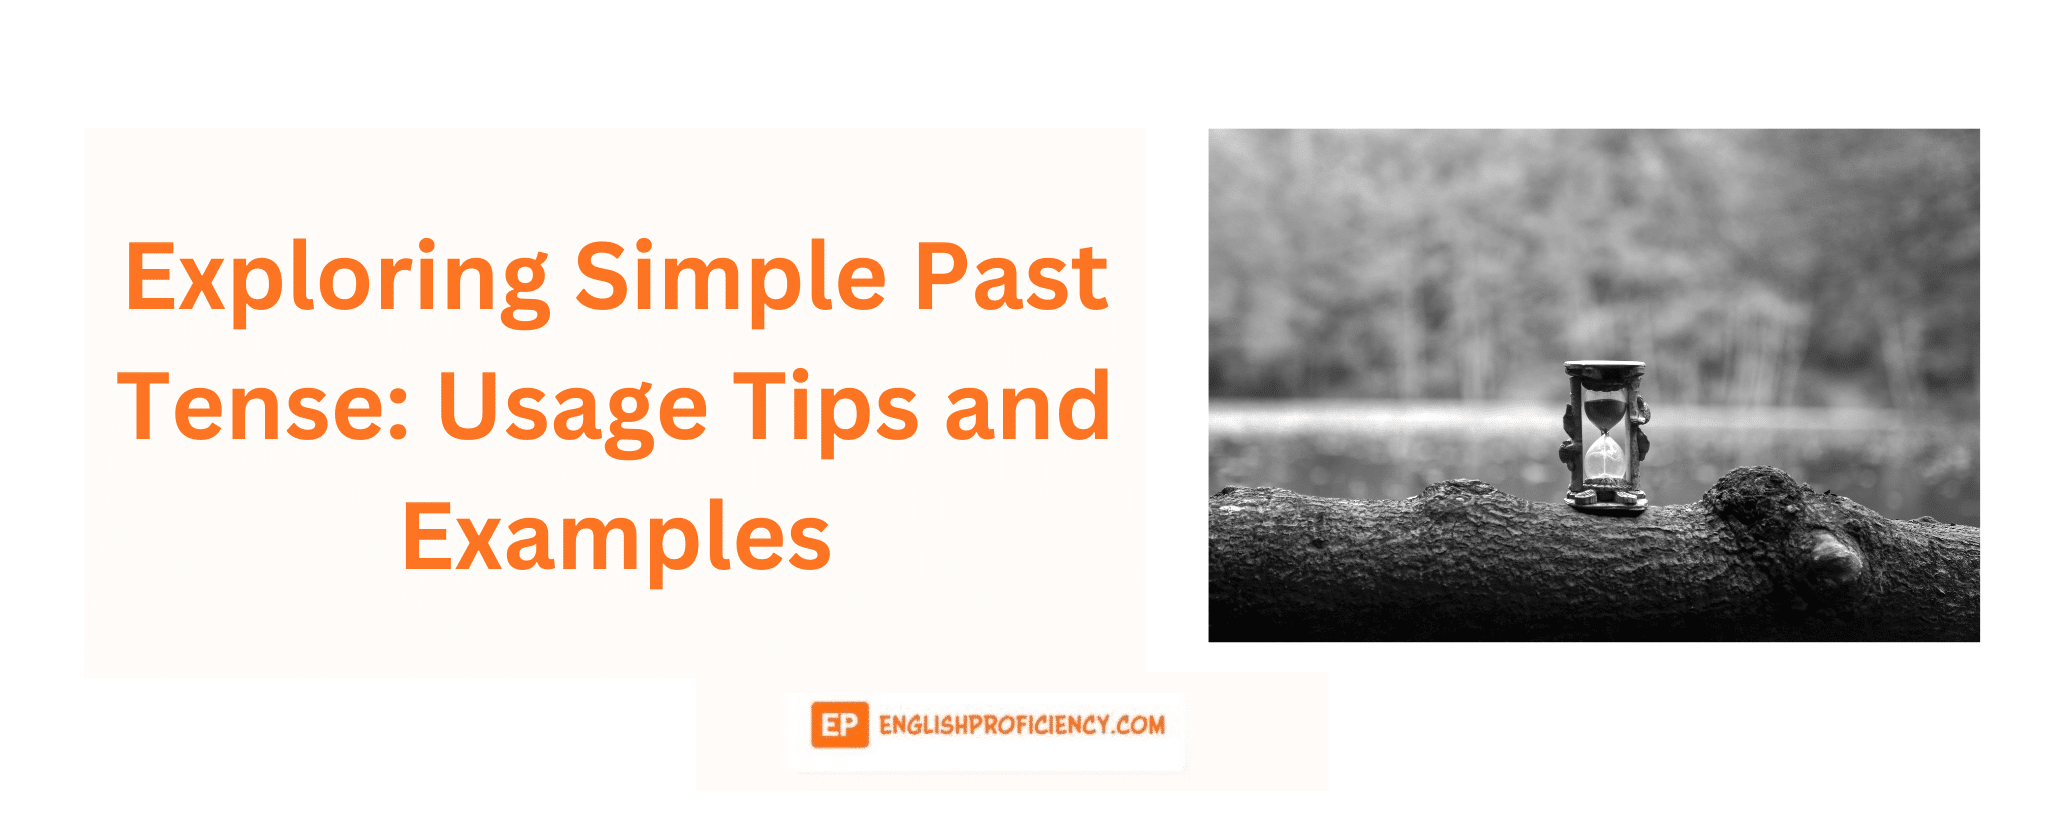 Exploring Simple Past Tense Usage Tips and